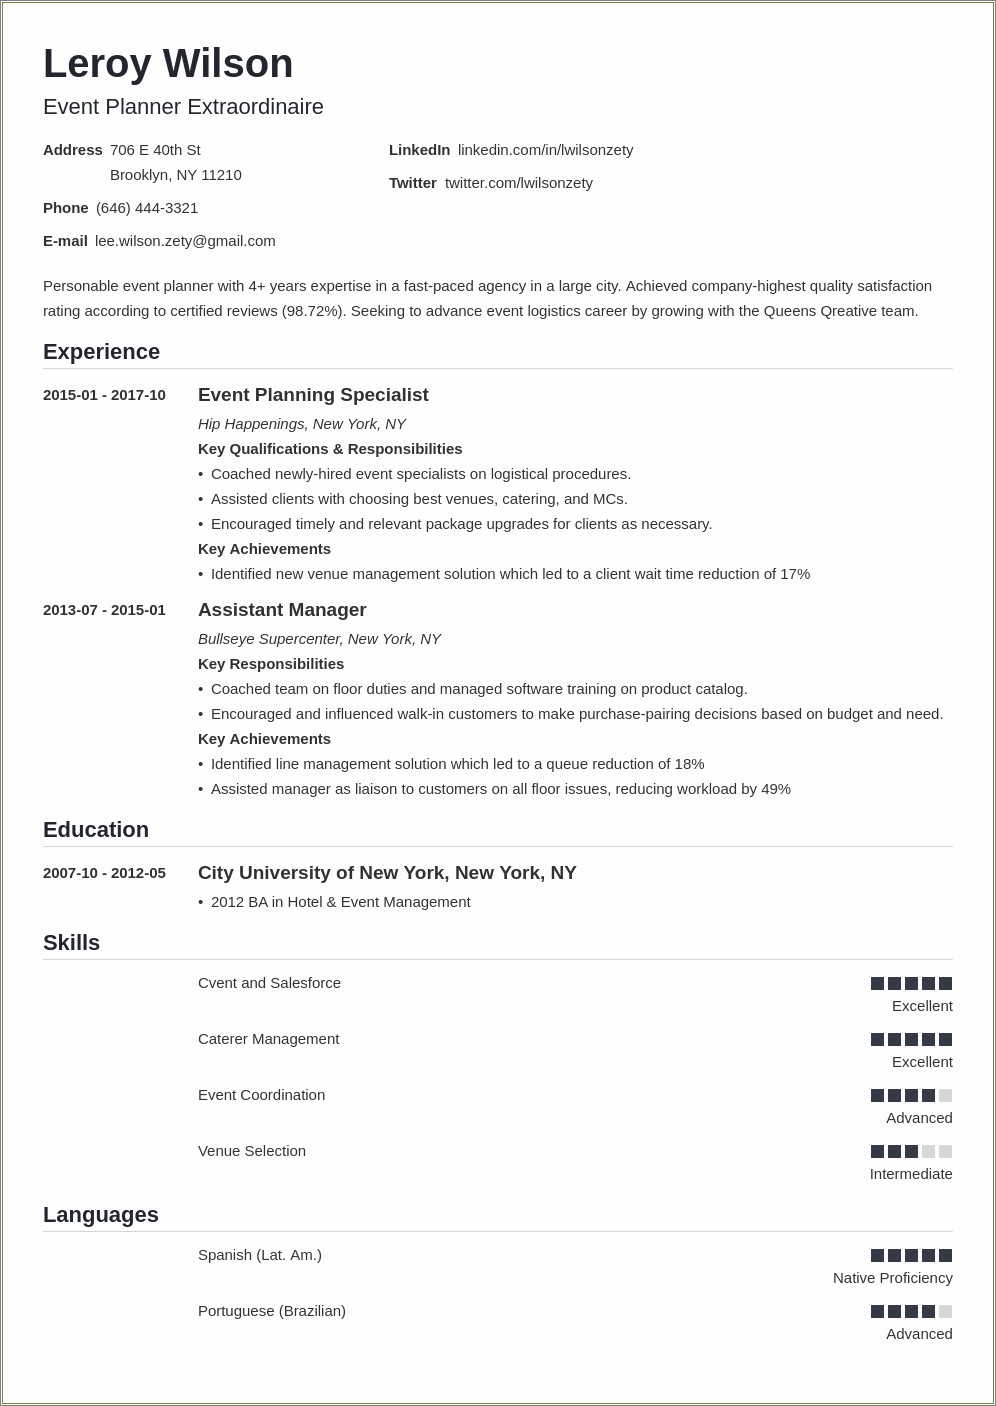 Resume Wording Office Ordering Event Planning